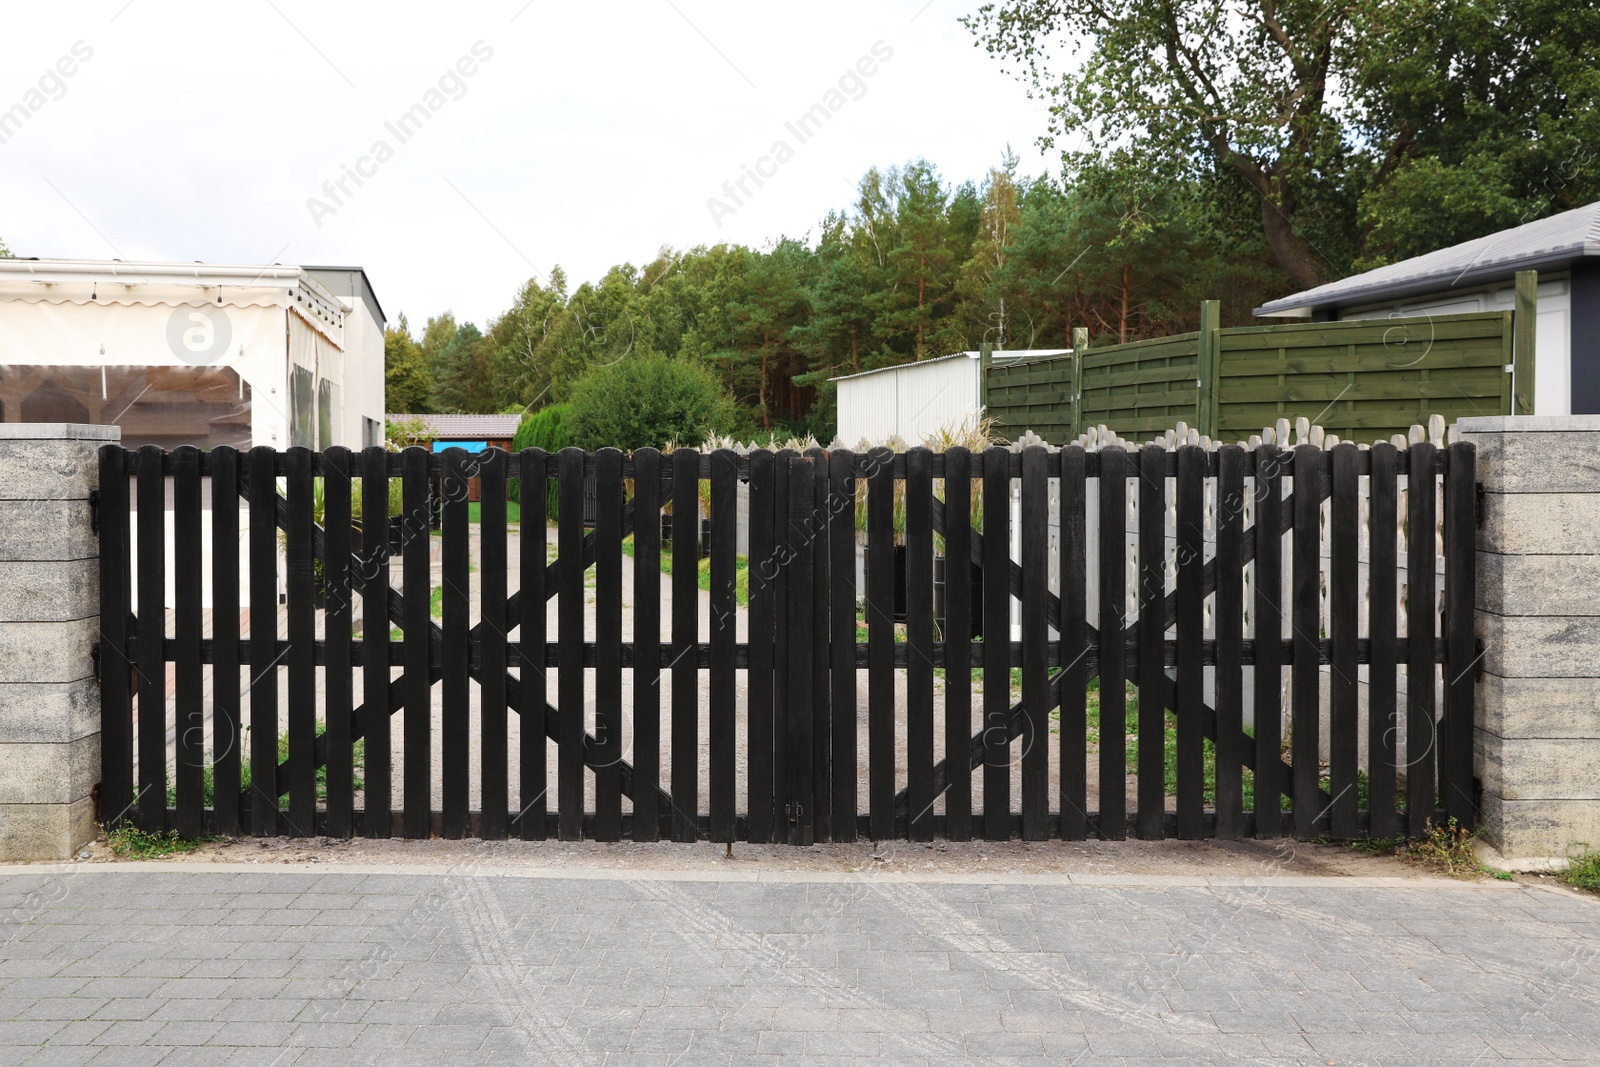 Photo of Closed wooden gates near beautiful trees and buildings outdoors